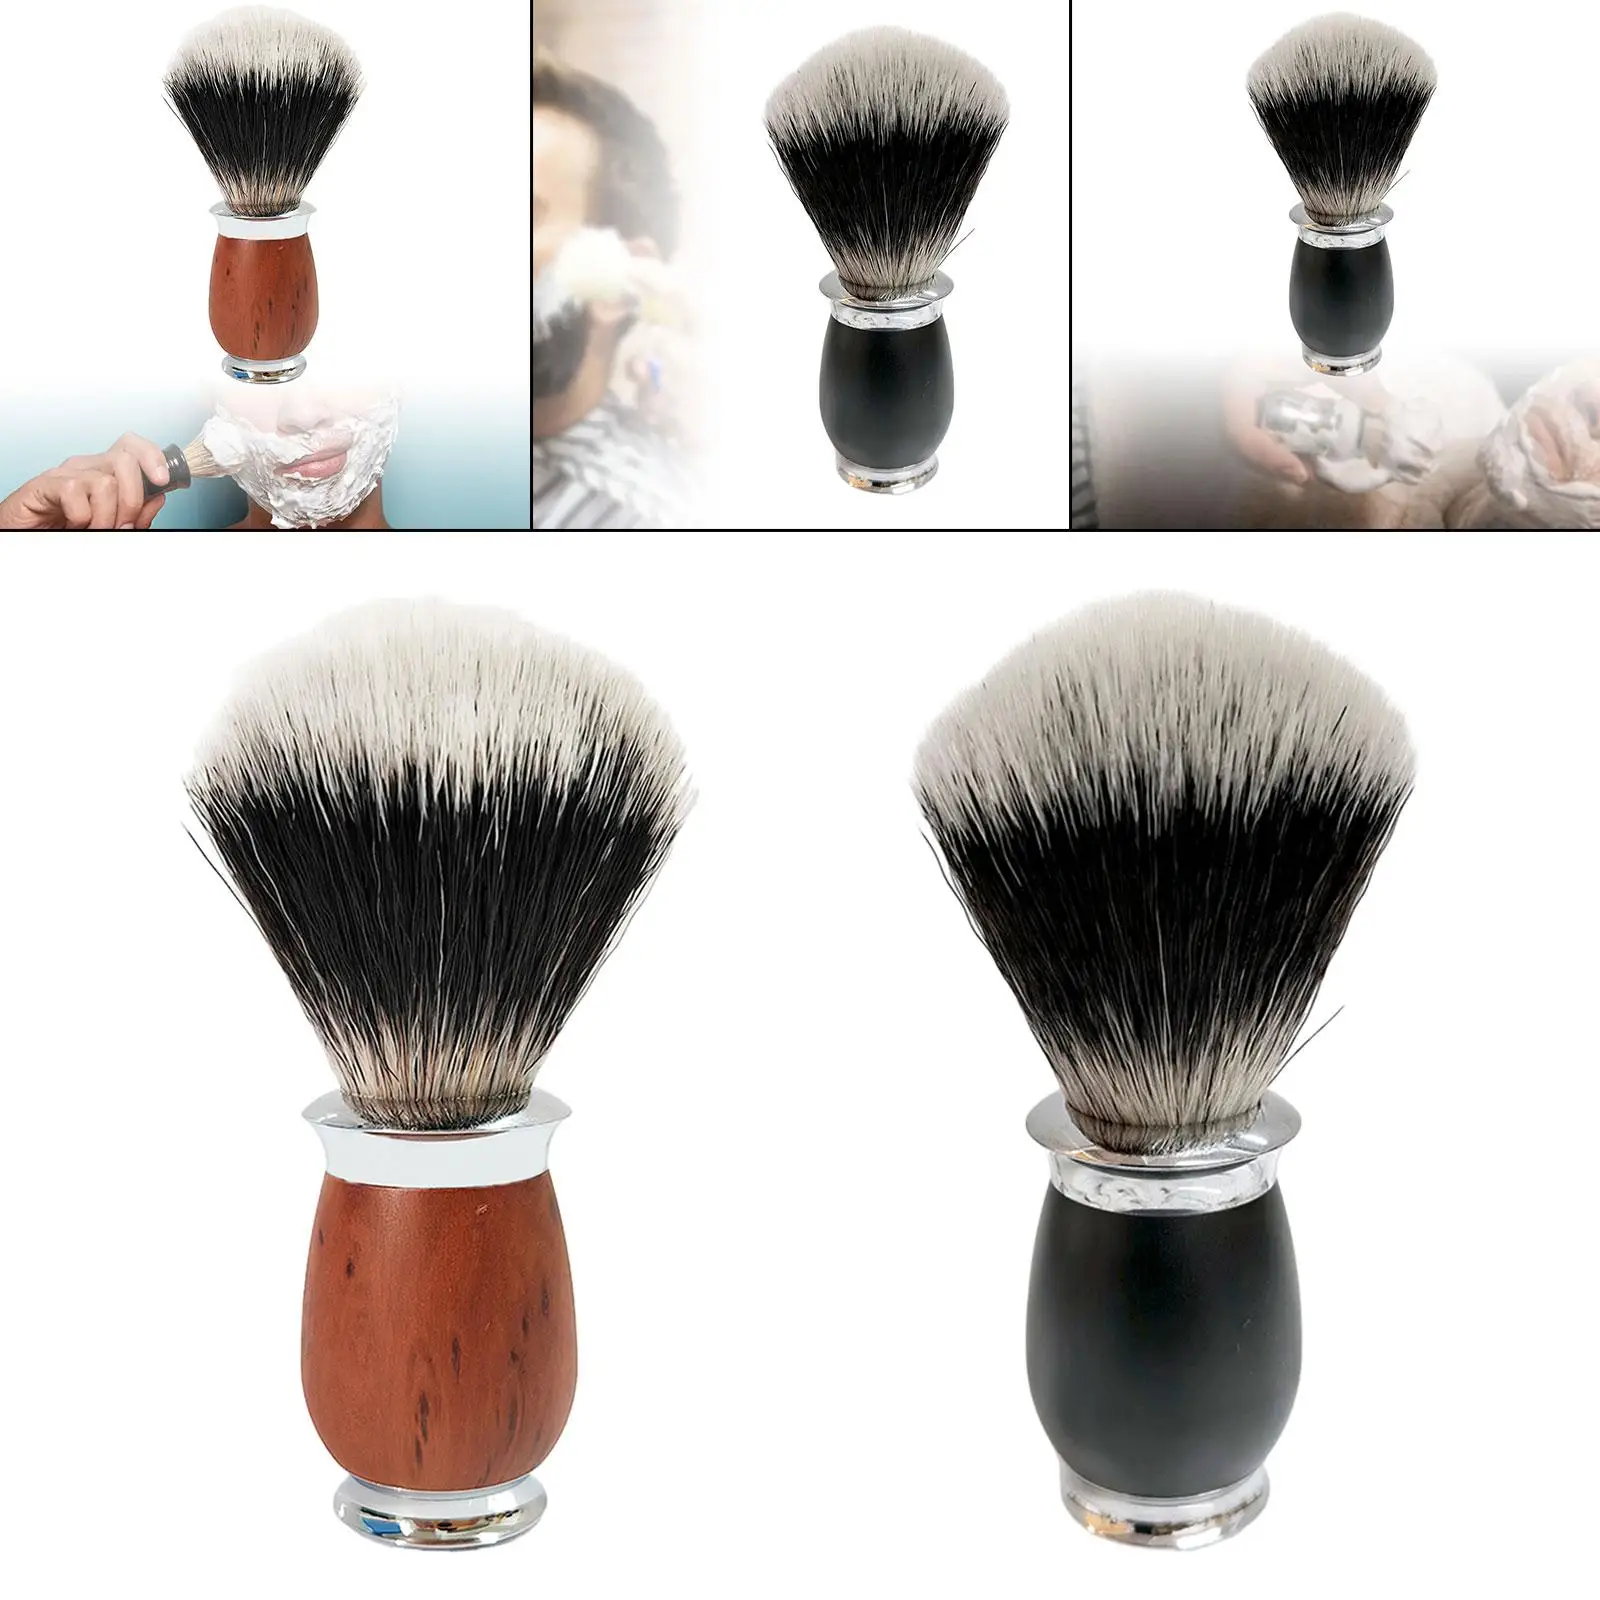 Men Shaving Brush Facial Beard Cleaning Travel Shave Accessory Classic Rich Lather Hand Crafted for Men Dad Boyfriend Husband